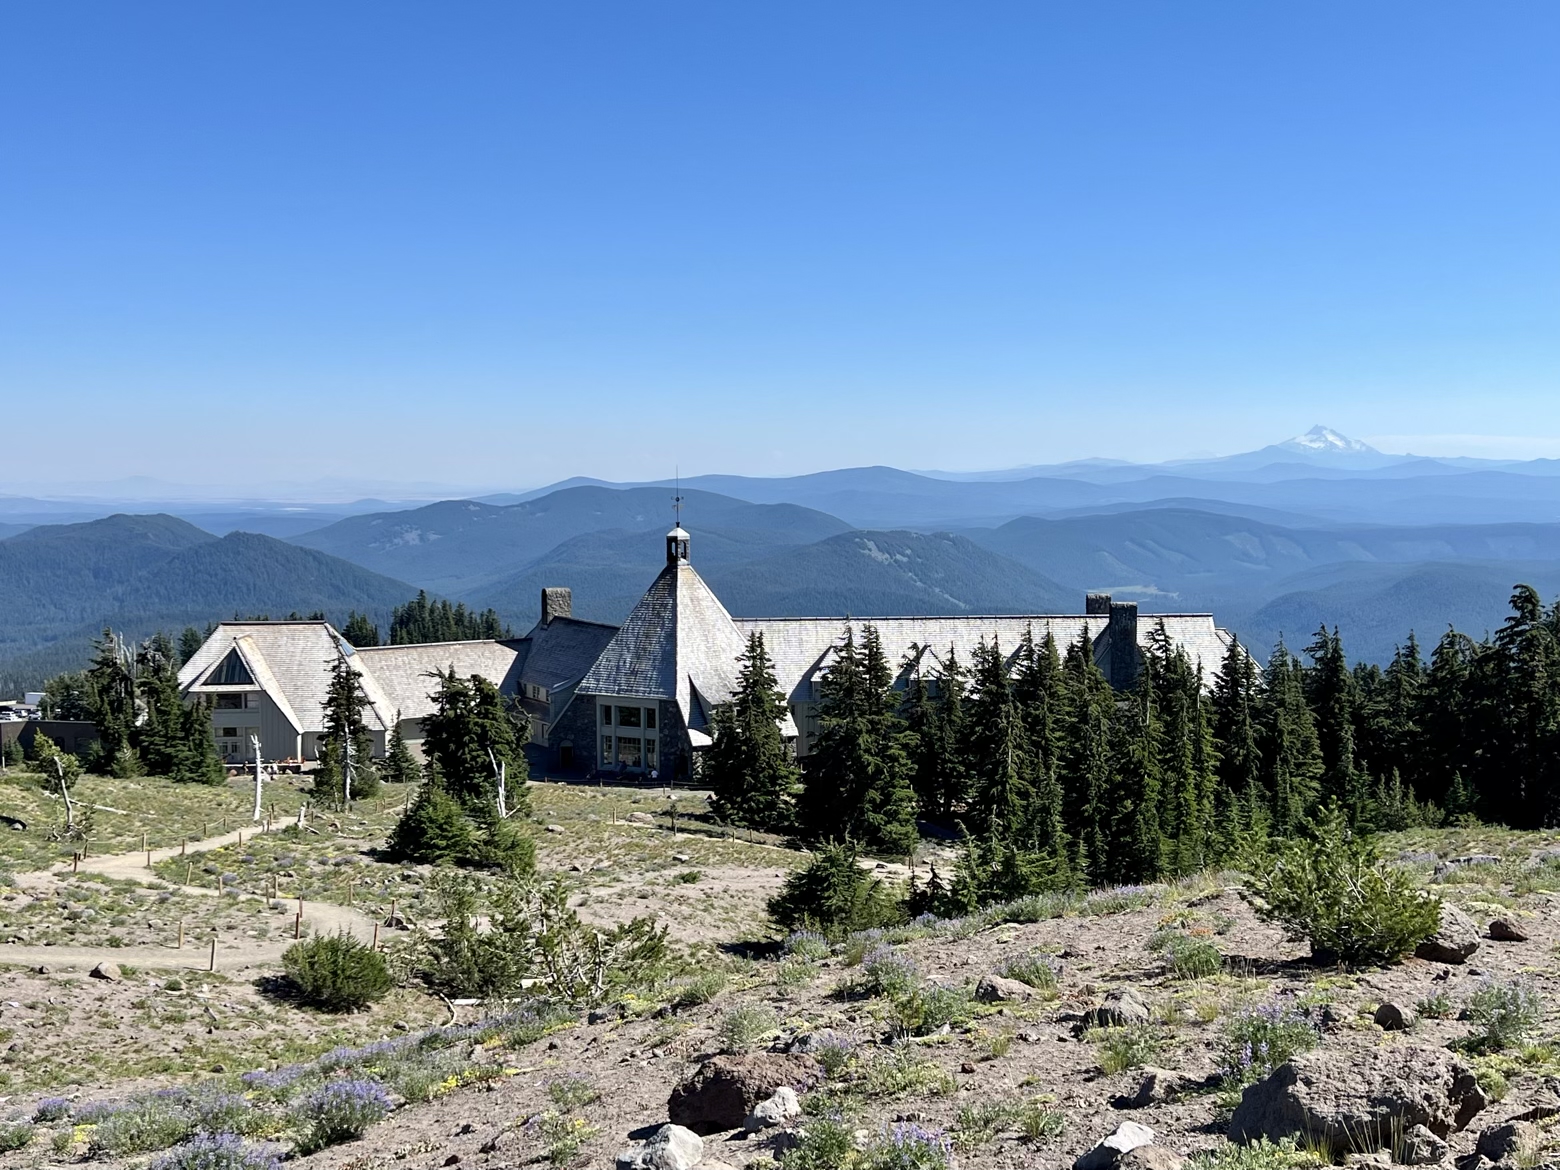 Timberline Lodge and a distant Mount Jefferson